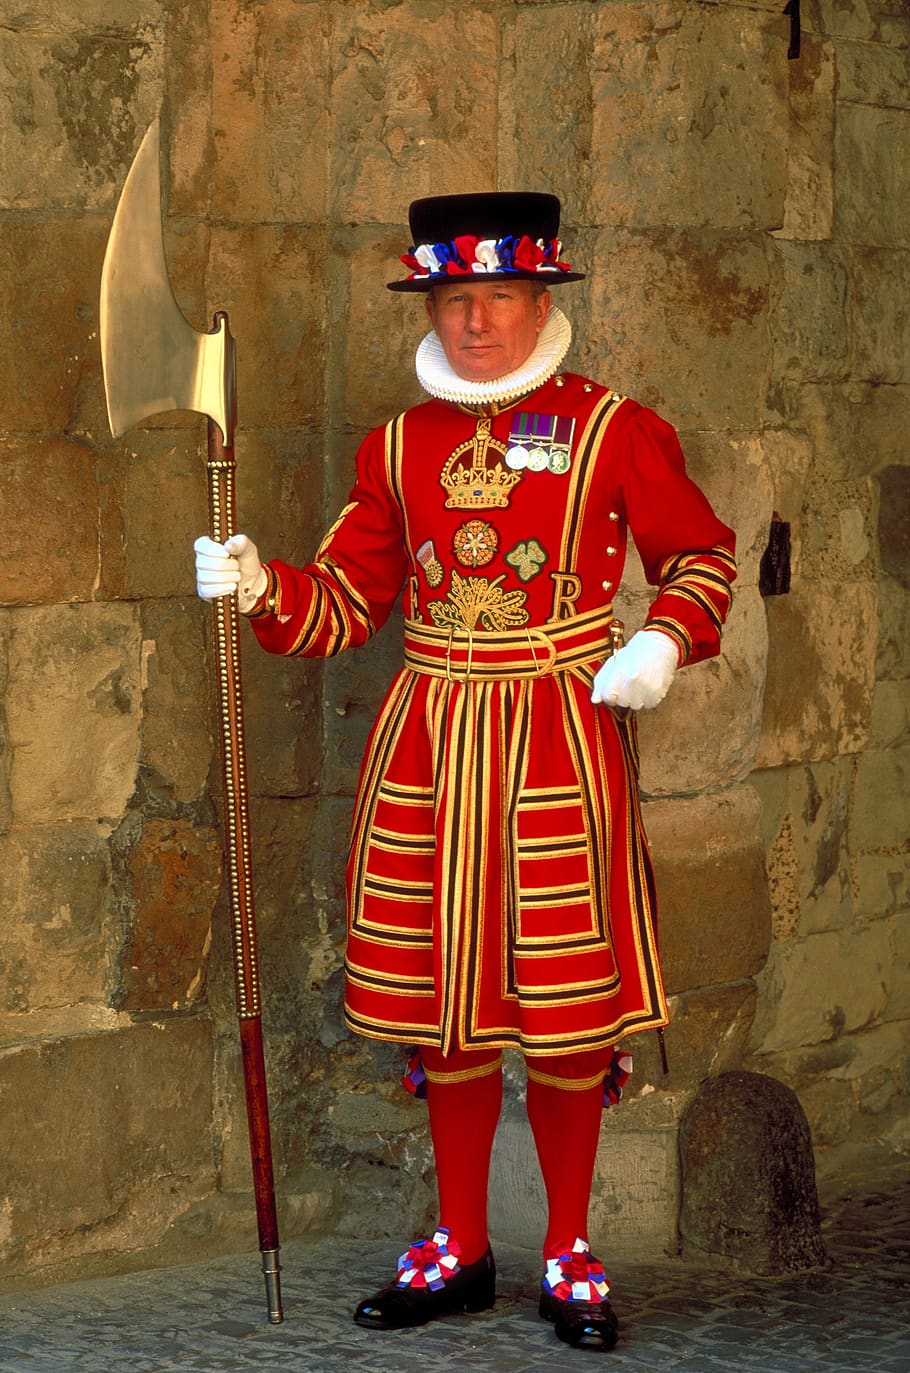 beefeater, tower, london, palace, britain, portrait, looking at camera, standing, red, the past